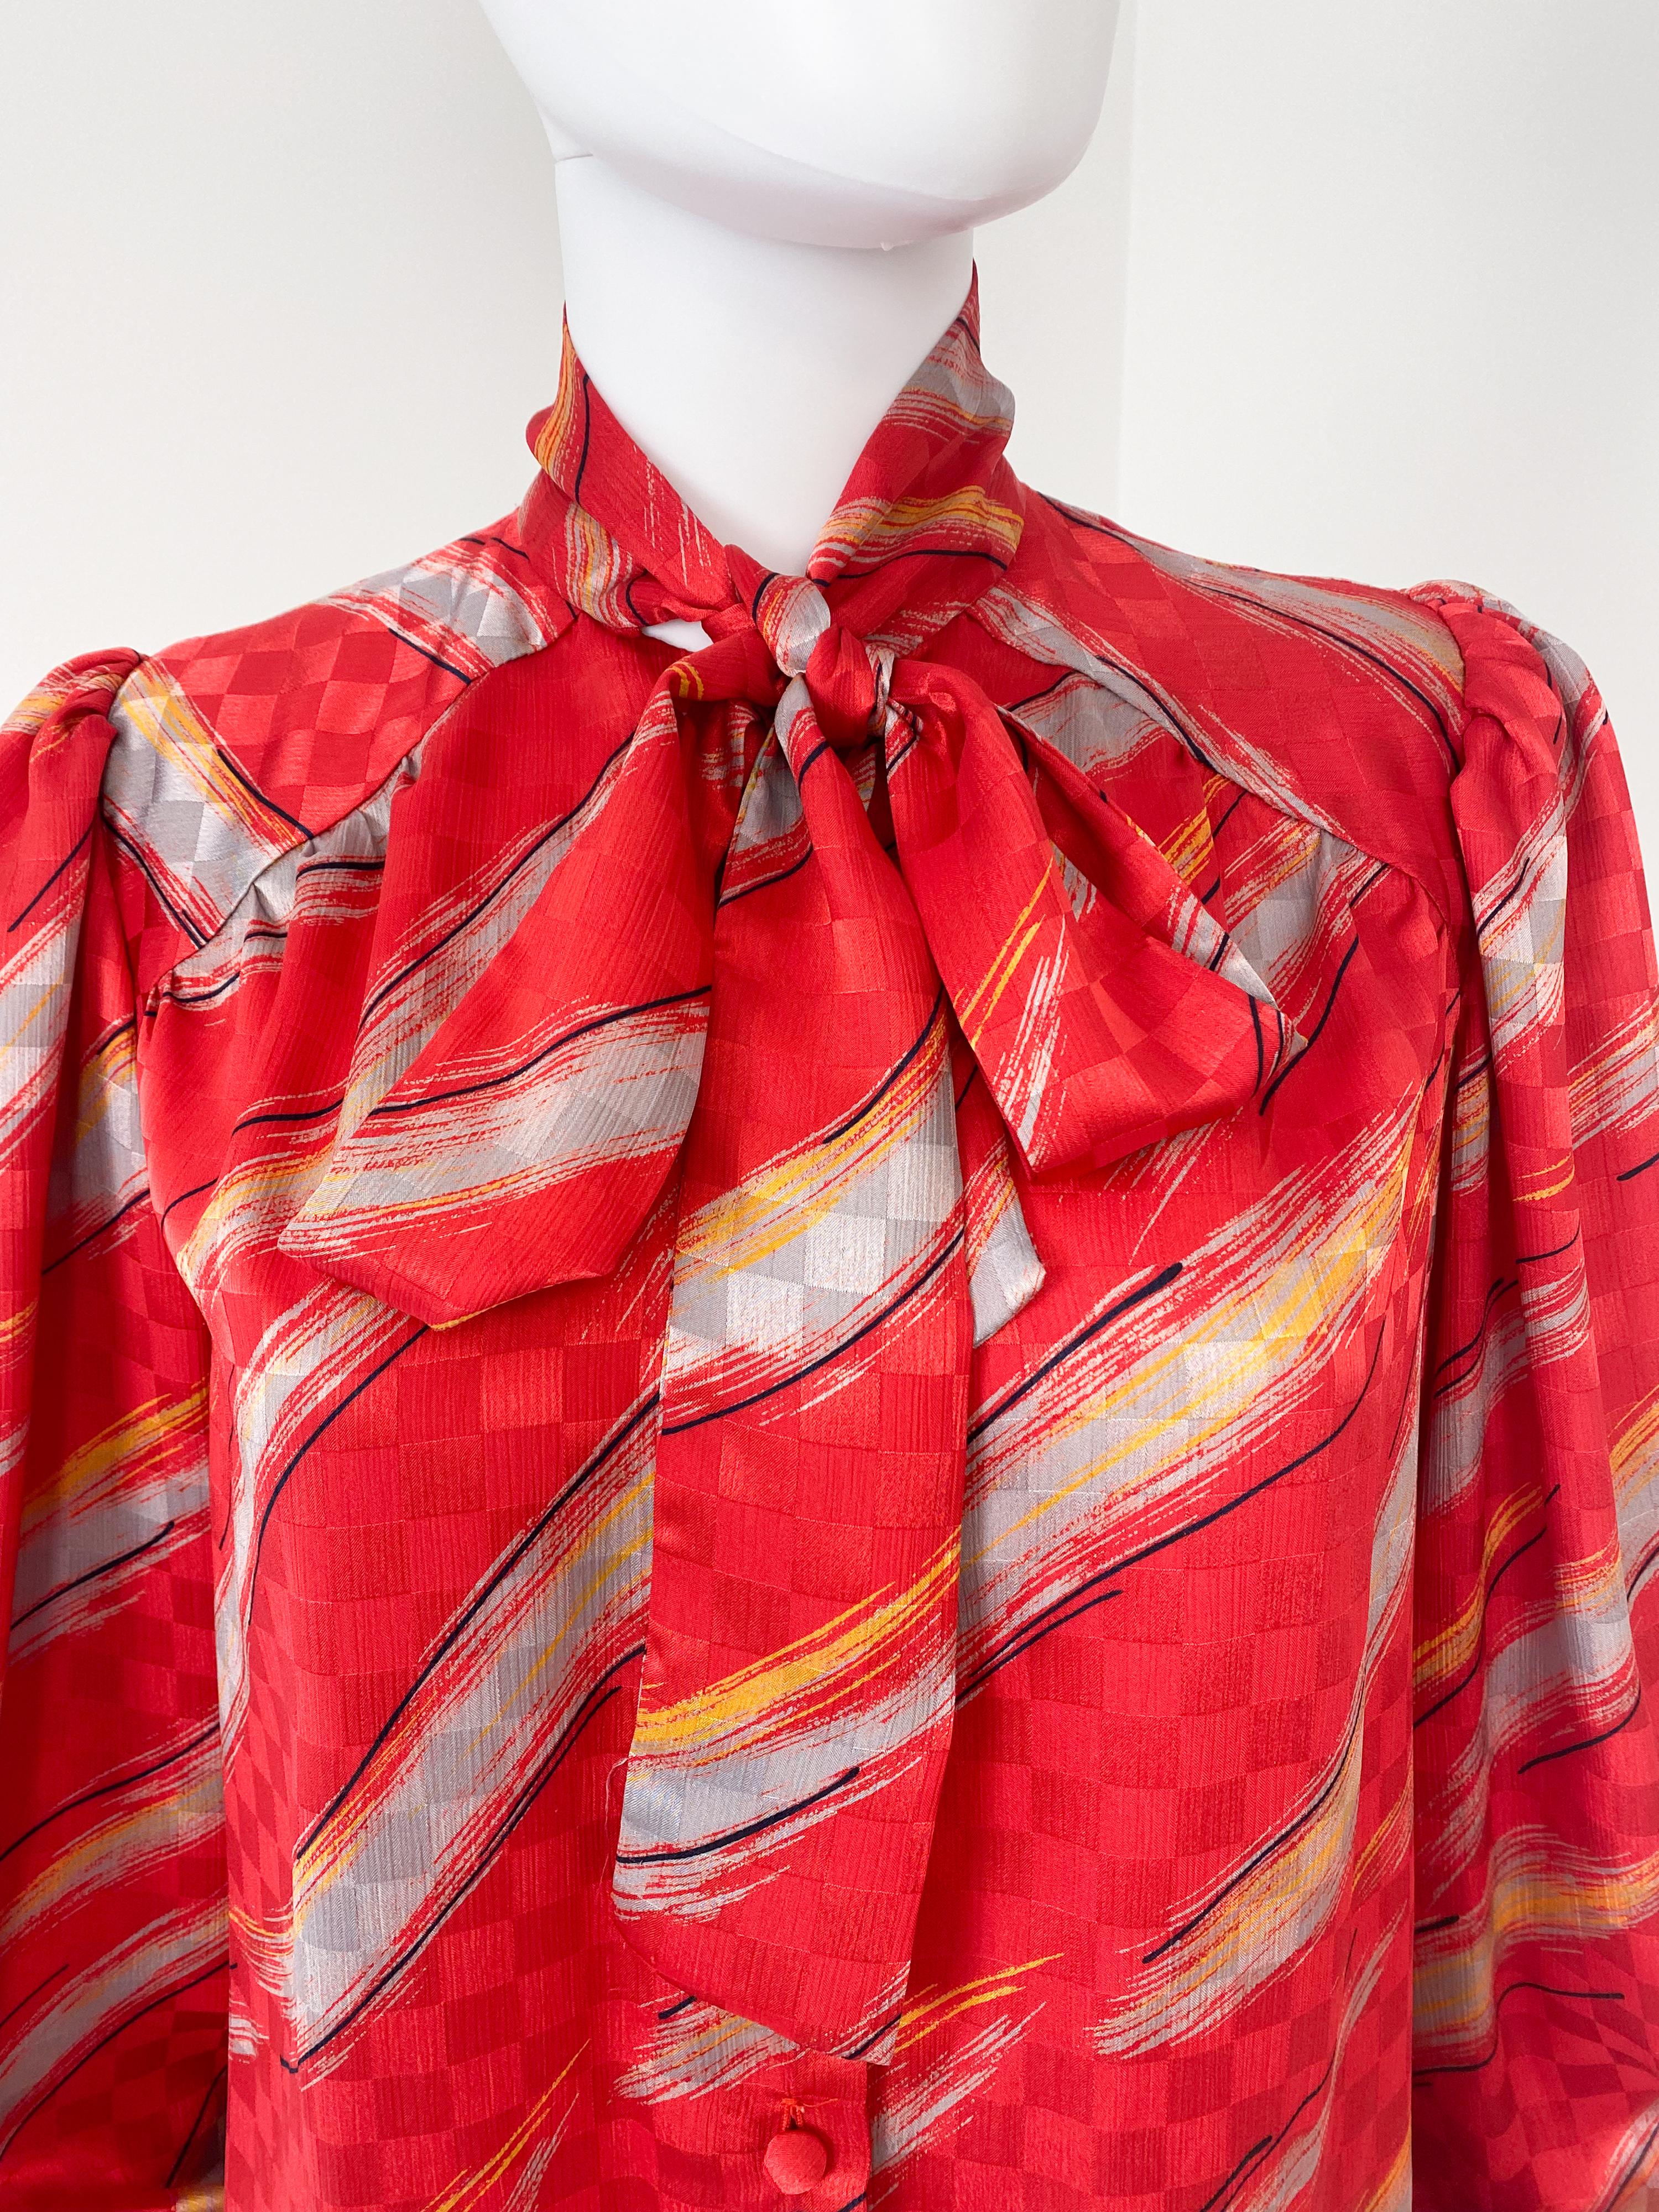 Women's Vintage 1980s Silky Polyester Blouse Top Red and Gray Slashes Size 10/12 For Sale